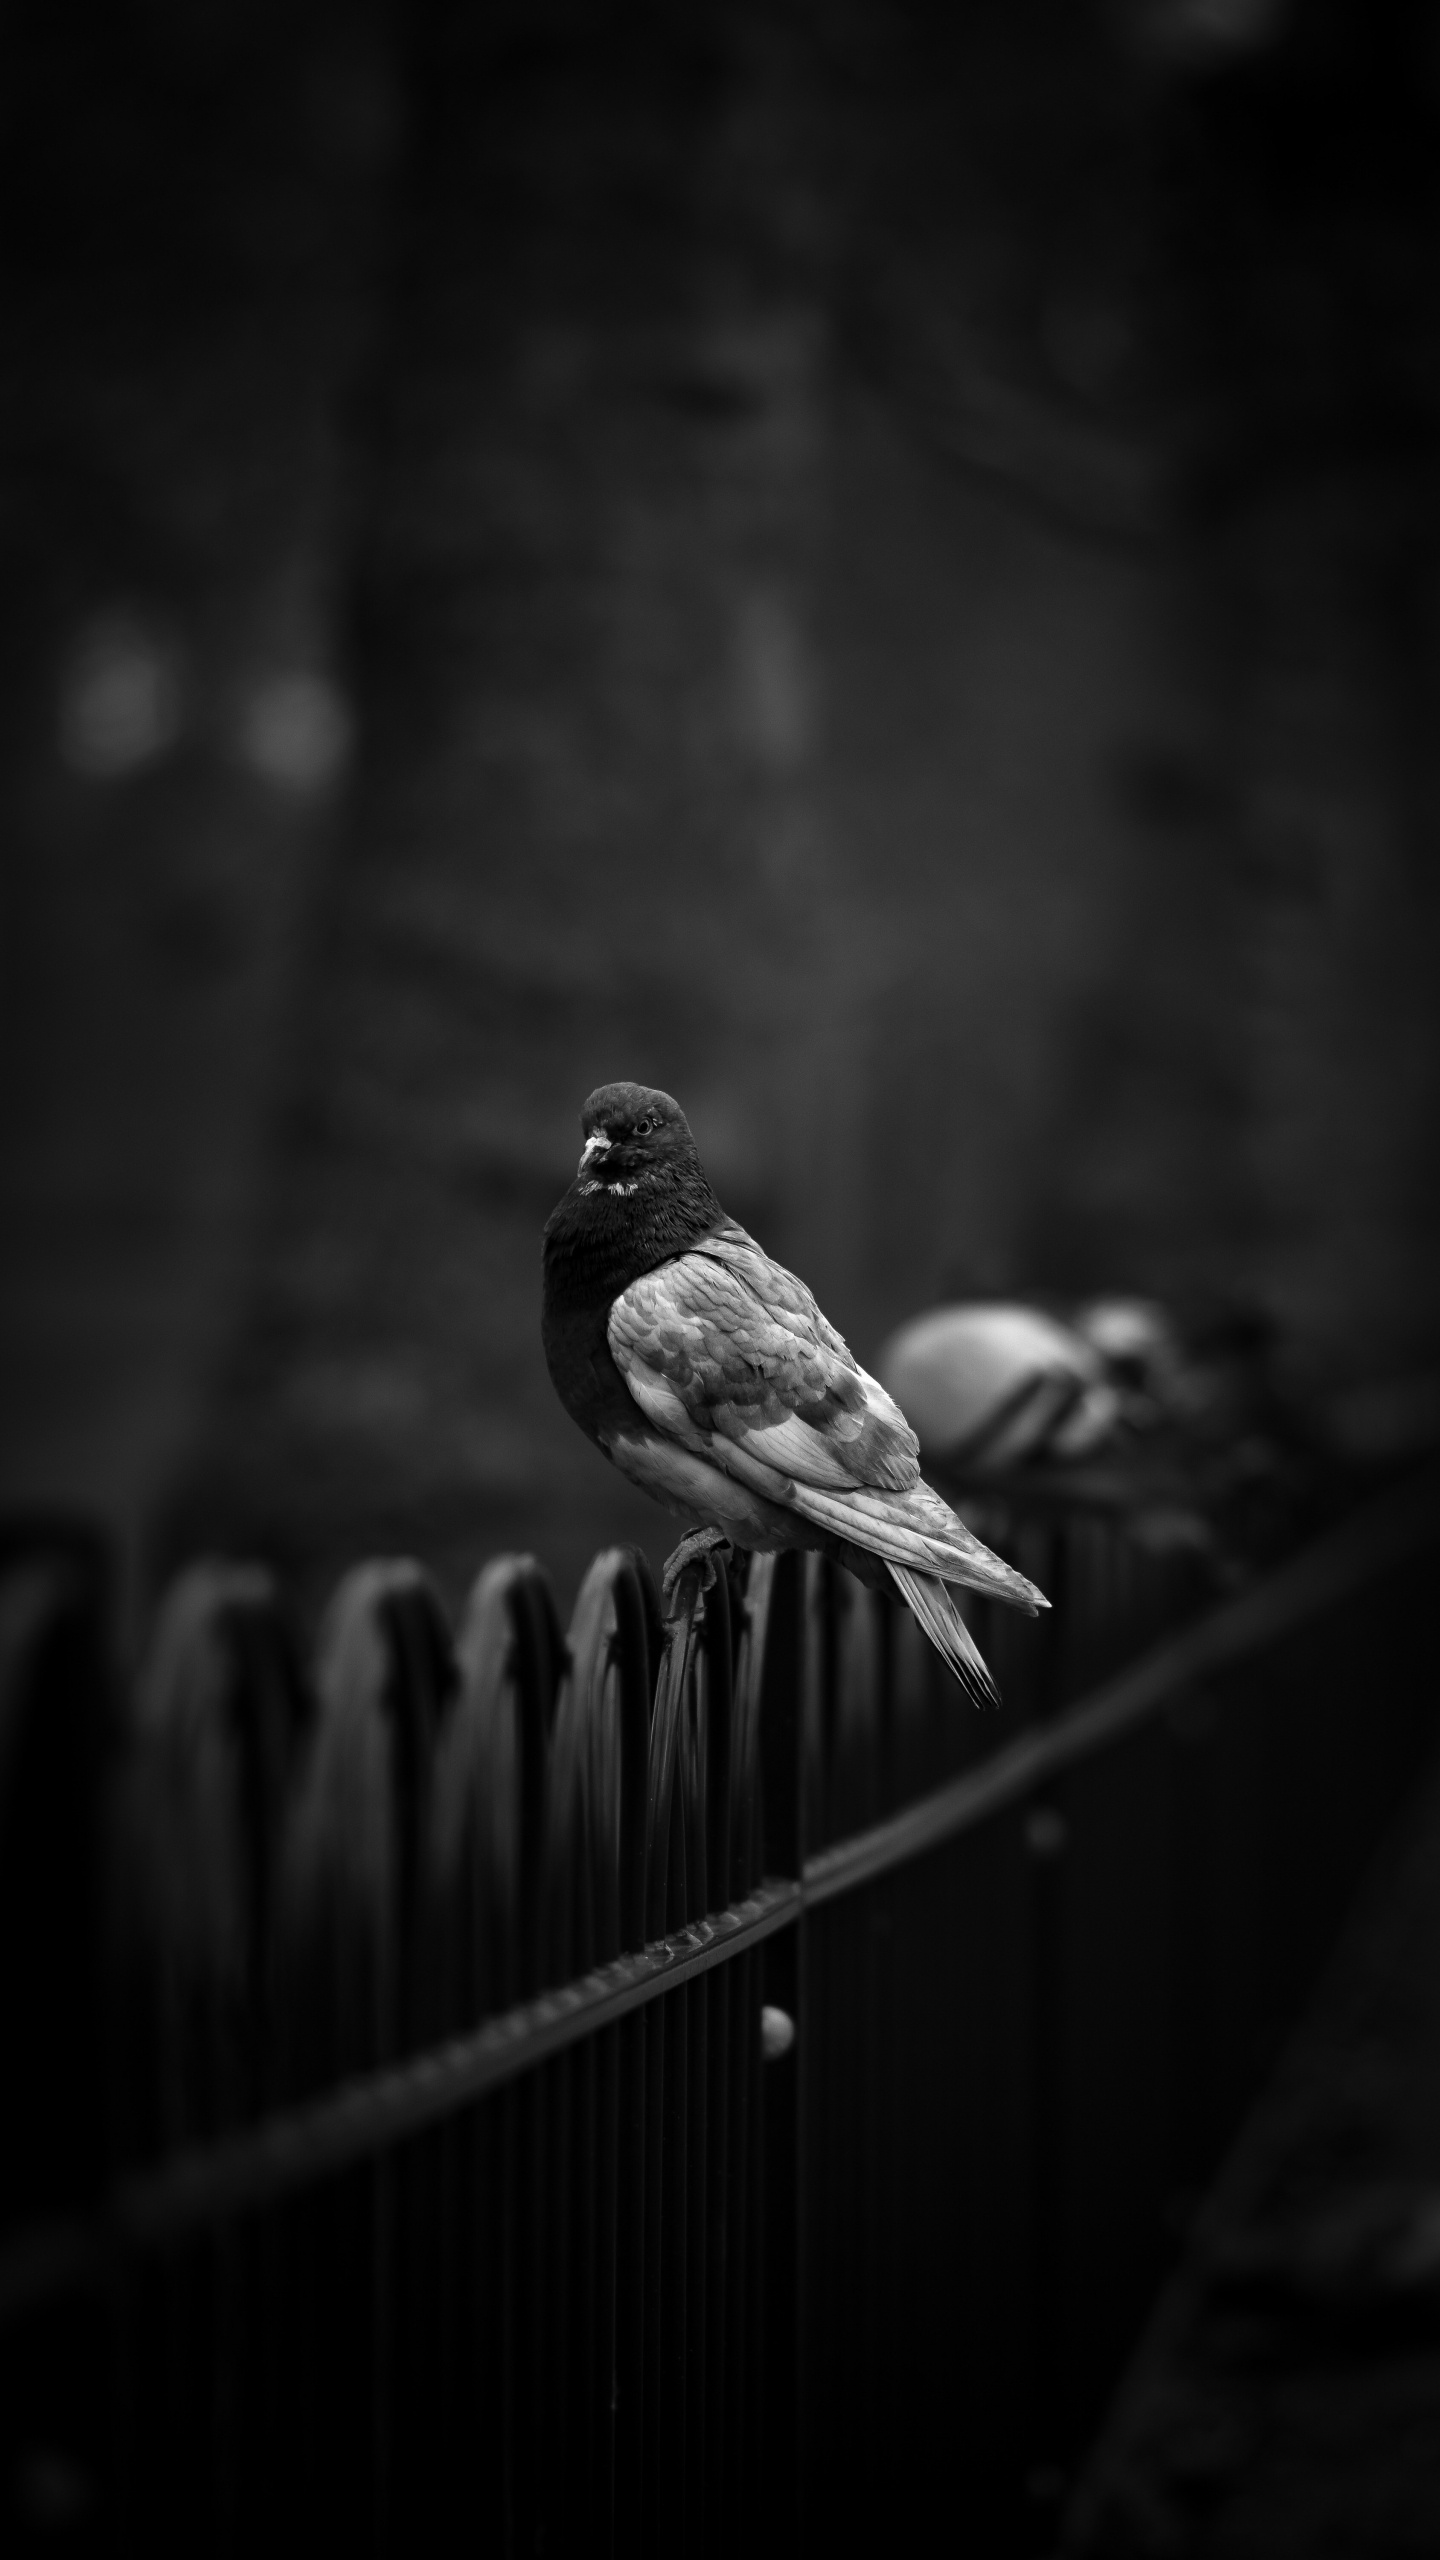 Grayscale Photo of a Bird on a Wooden Fence. Wallpaper in 1440x2560 Resolution